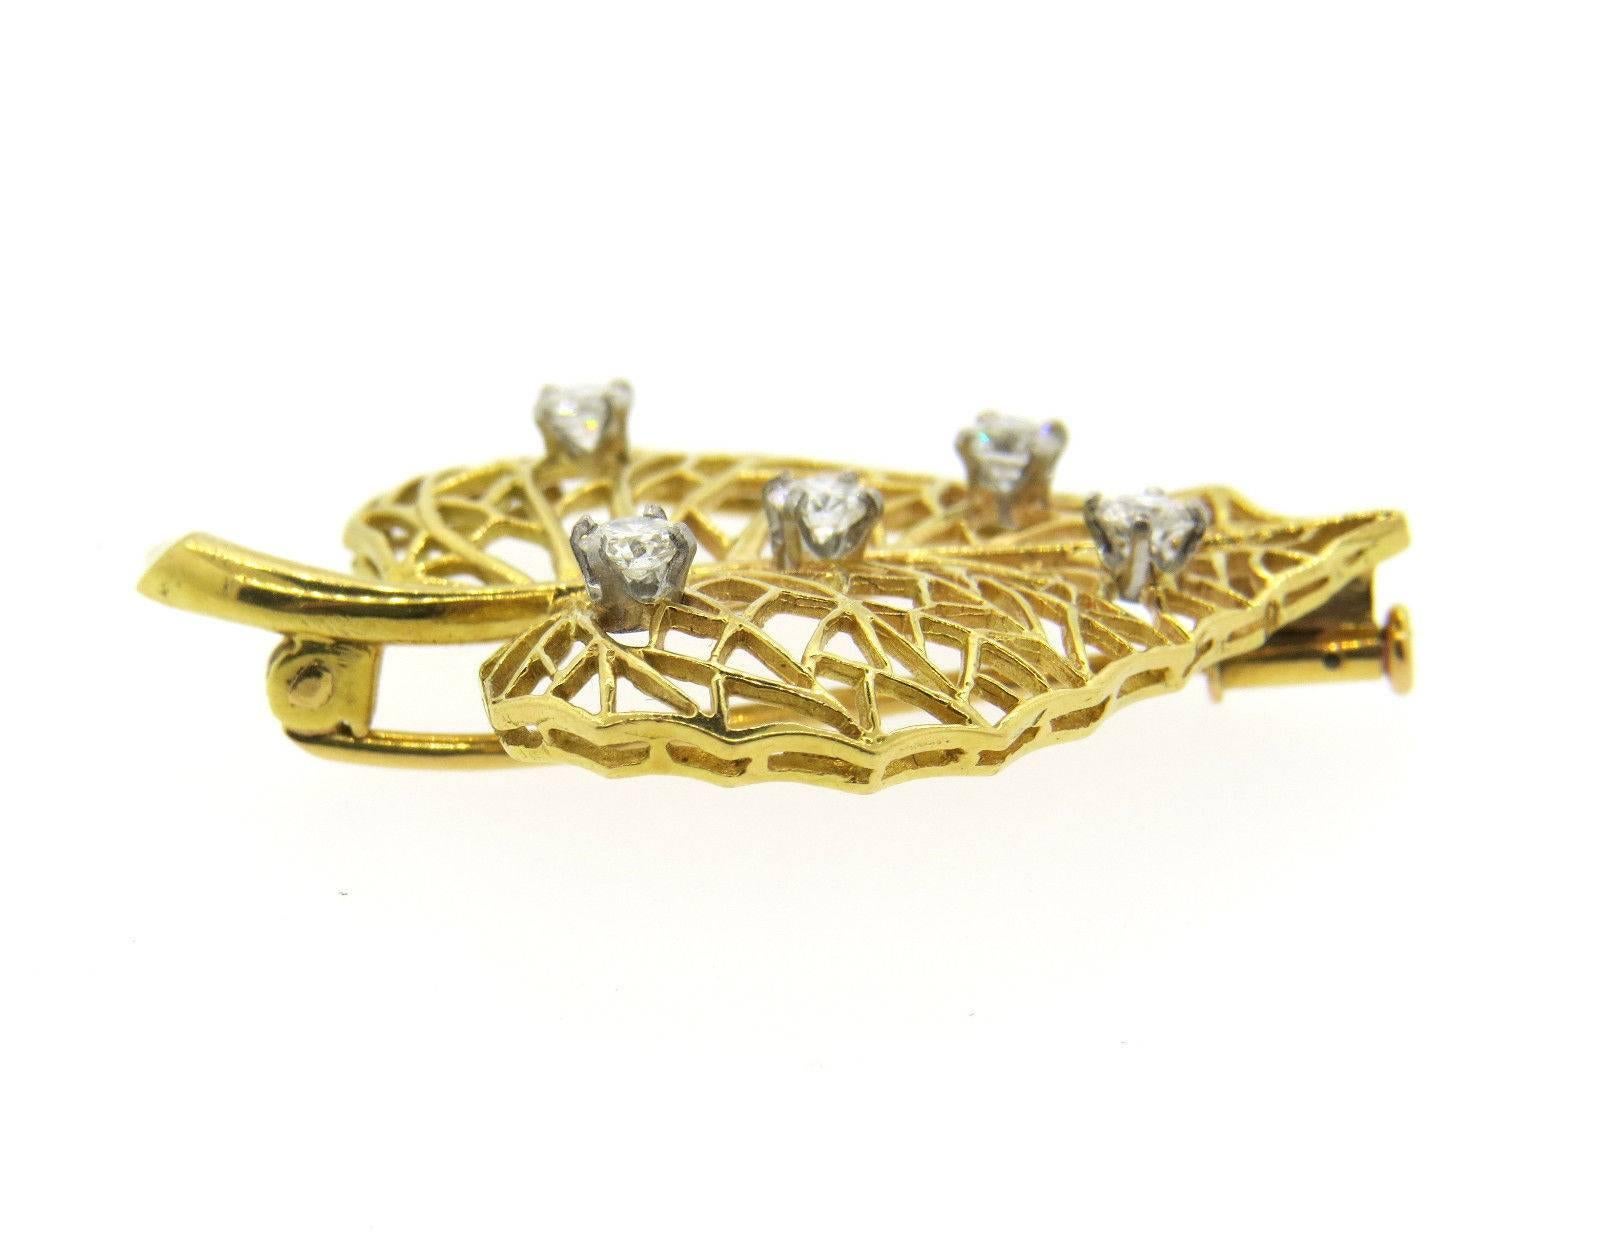 An 18k yellow gold leaf brooch set with approximately 0.70ctw of G/VS diamonds.  The brooch measures 40mm x 29mm and weighs 6.9 grams.  Marked: made in France, Cartier, 18ct.